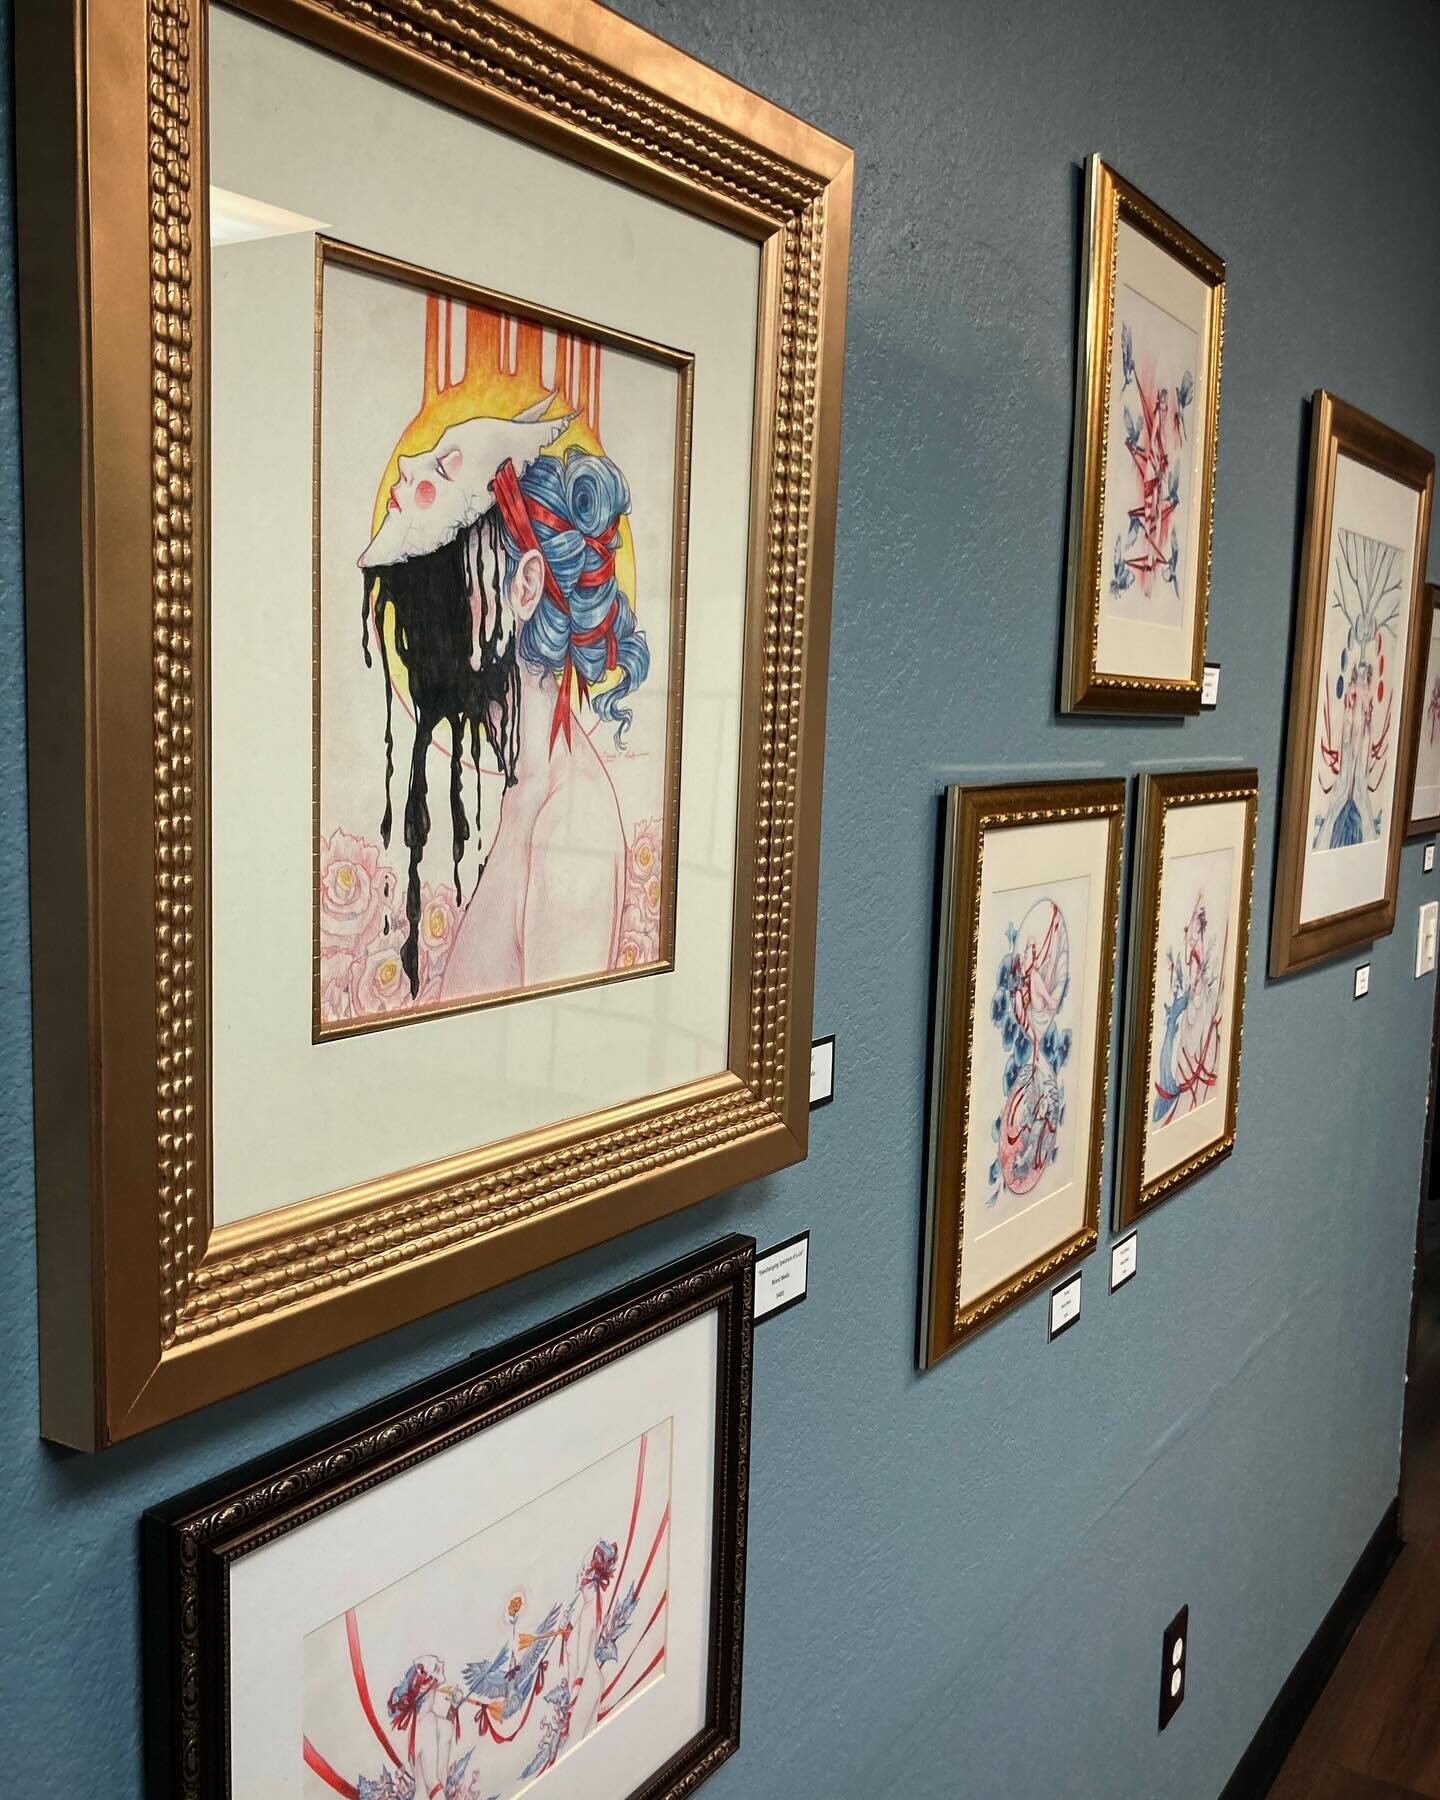 Just a reminder that a great majority of my original, traditional work is still currently on display in the gallery @sacredninetattoo in South #Sacramento / #elkgroveca &ndash; til 5/12!

Nothing would mean more to me than seeing these fragments of m